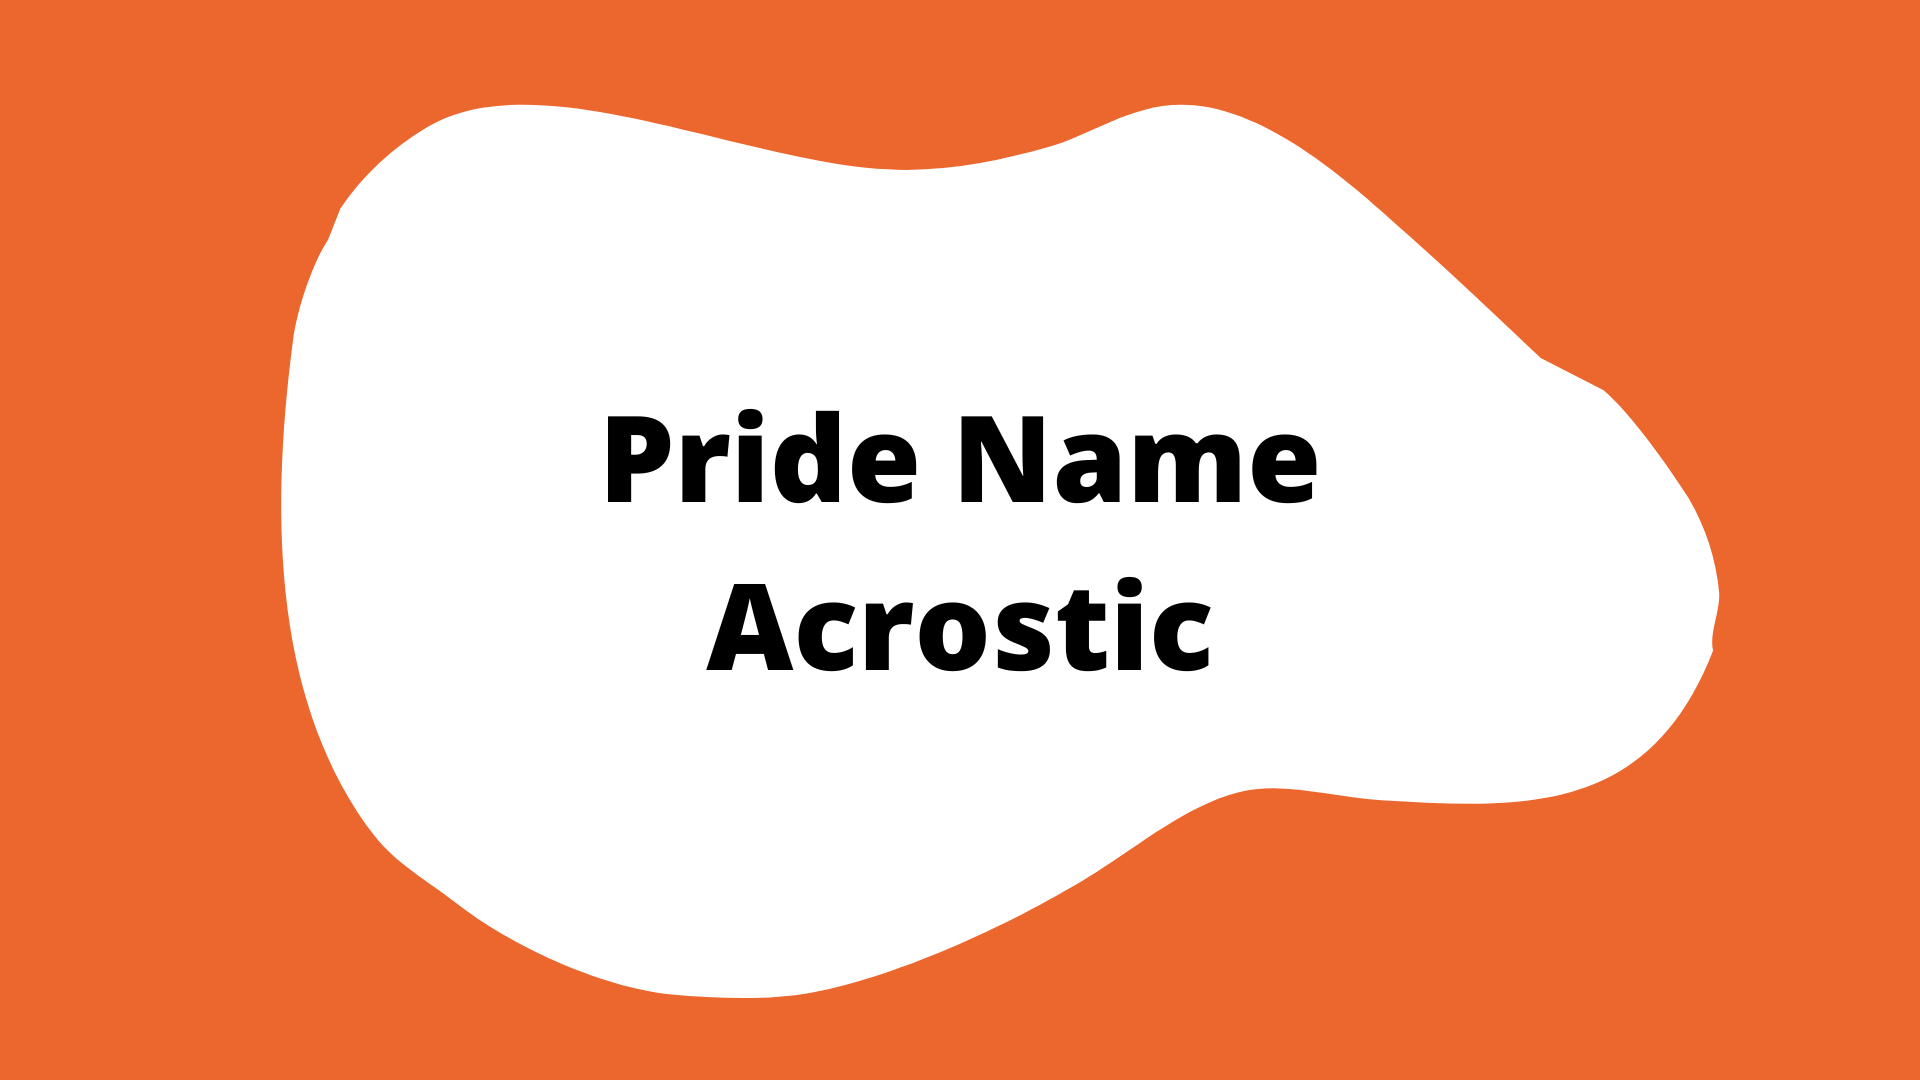 "pride name acrostic" activity button. An orange square with a white blob in the center. The title is in the blob.